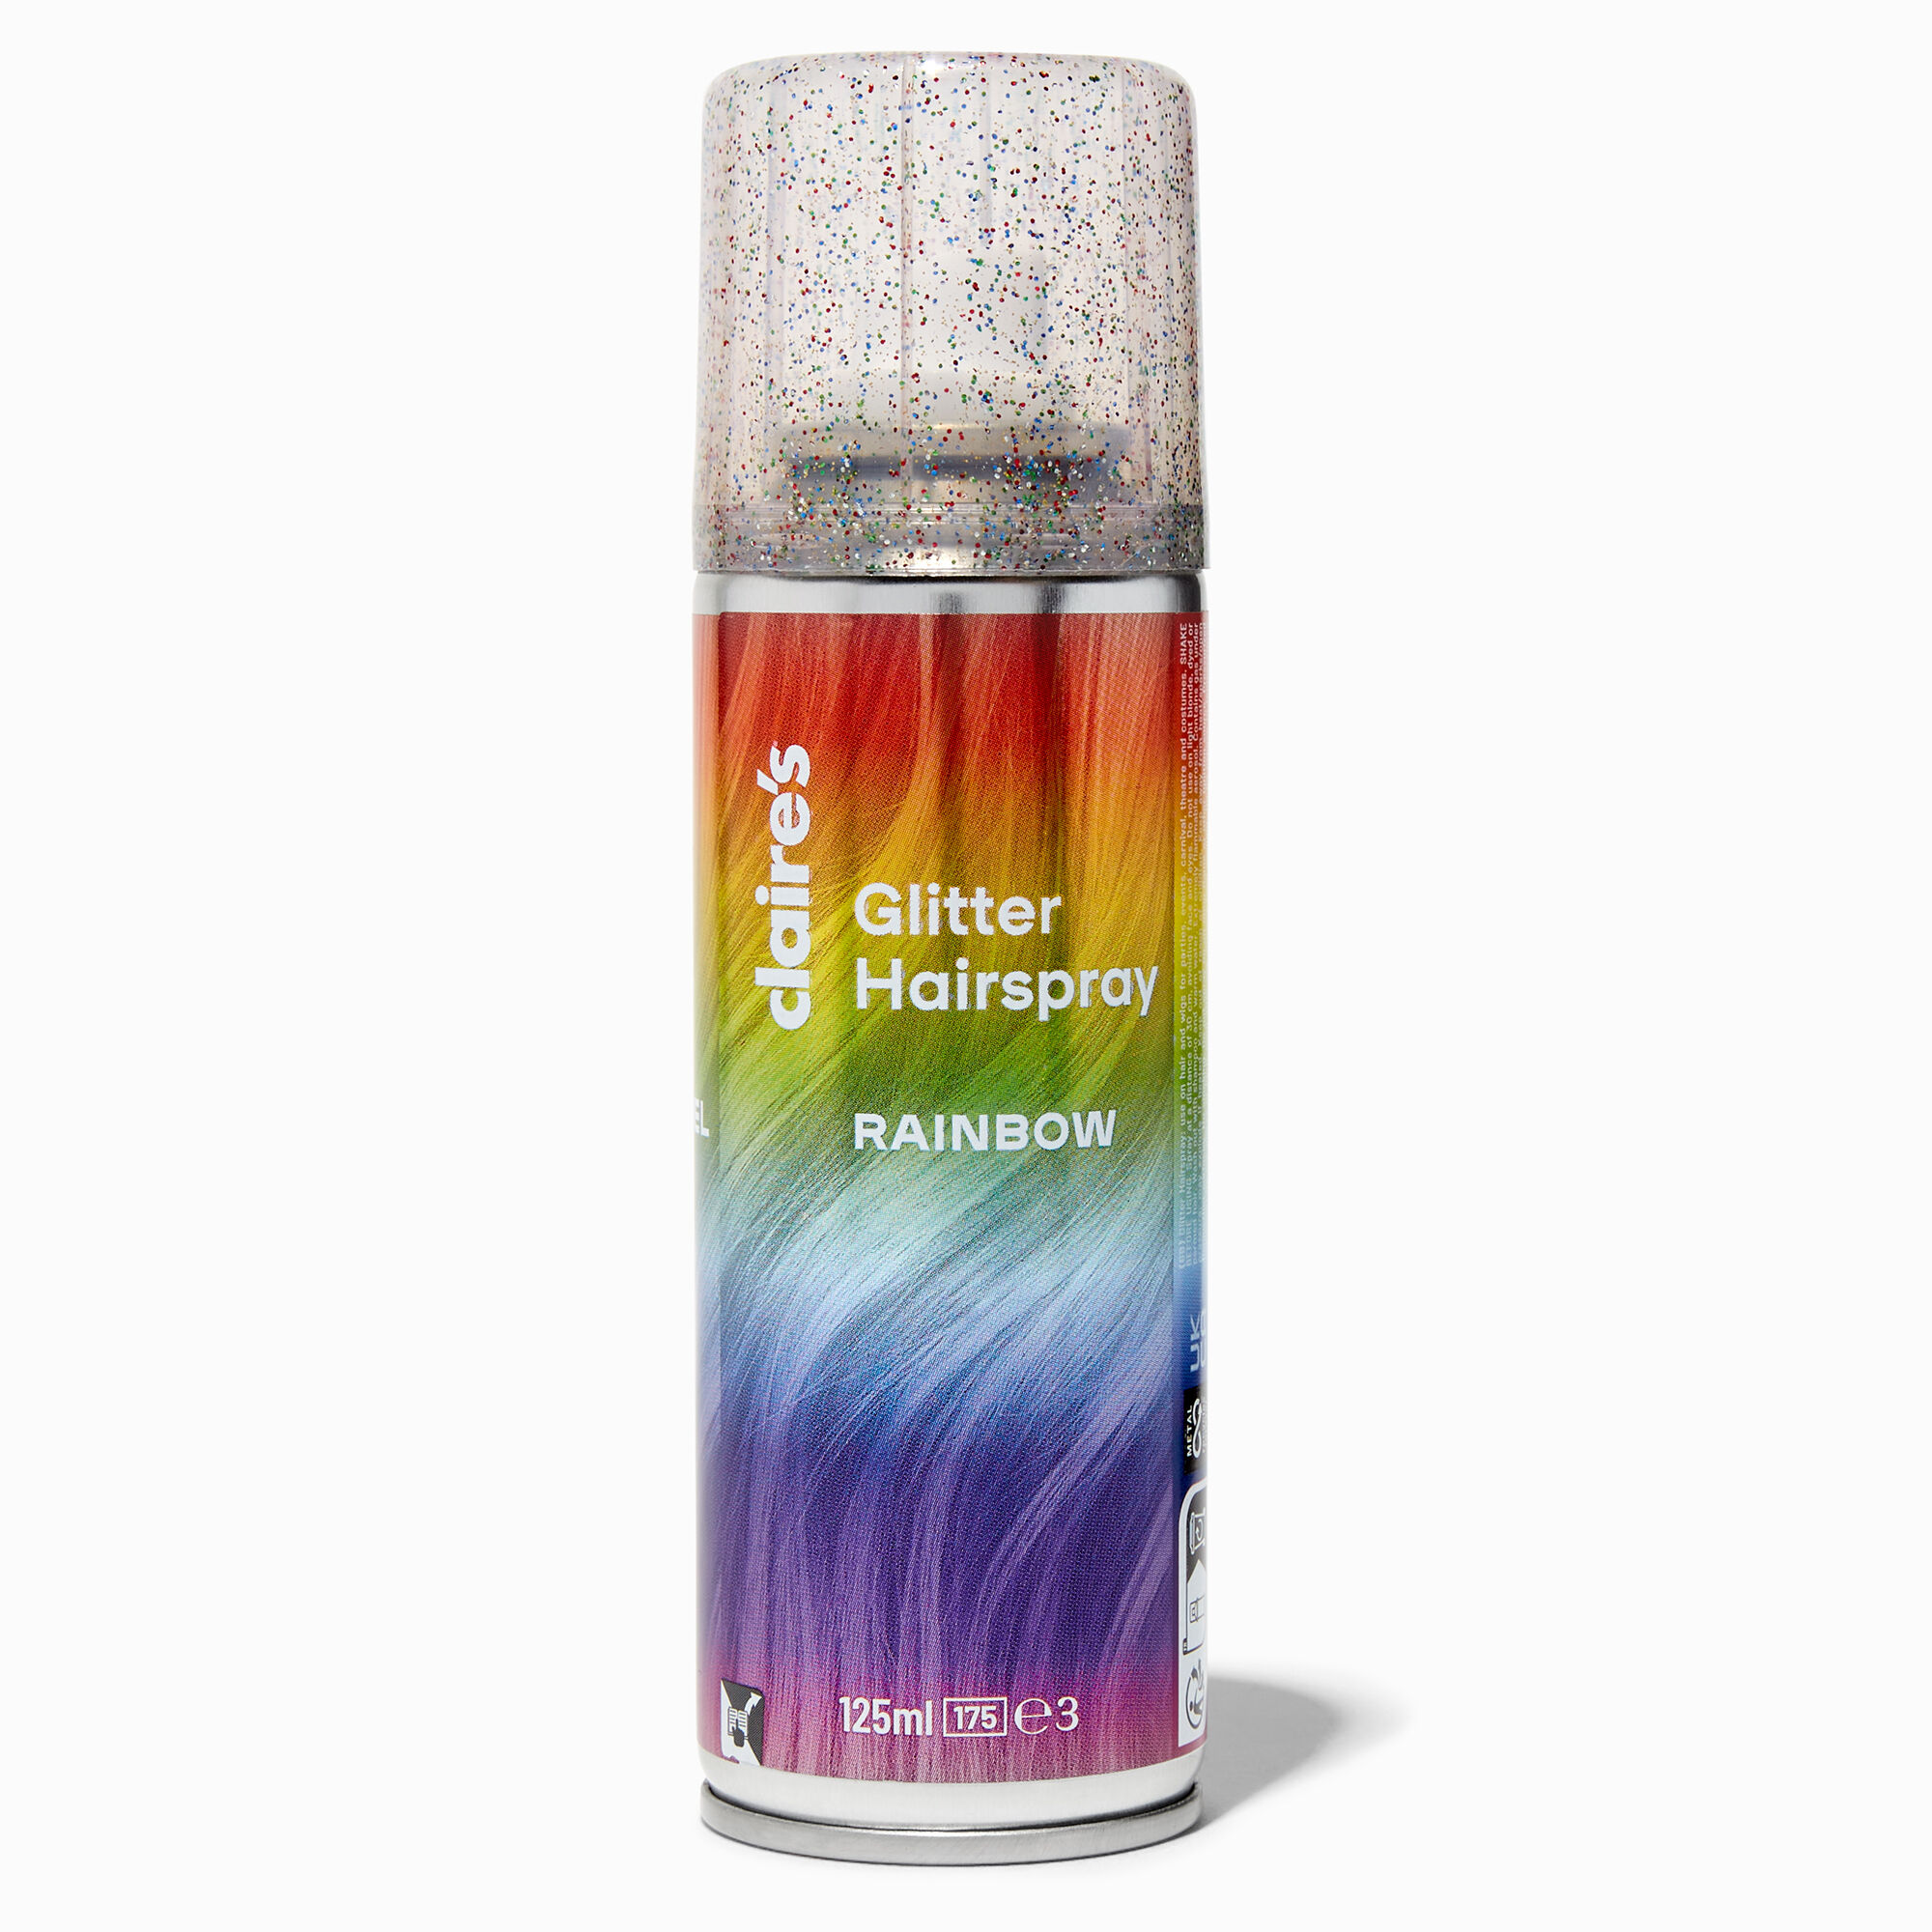 View Claires Glitter Colour Hairspray Rainbow information